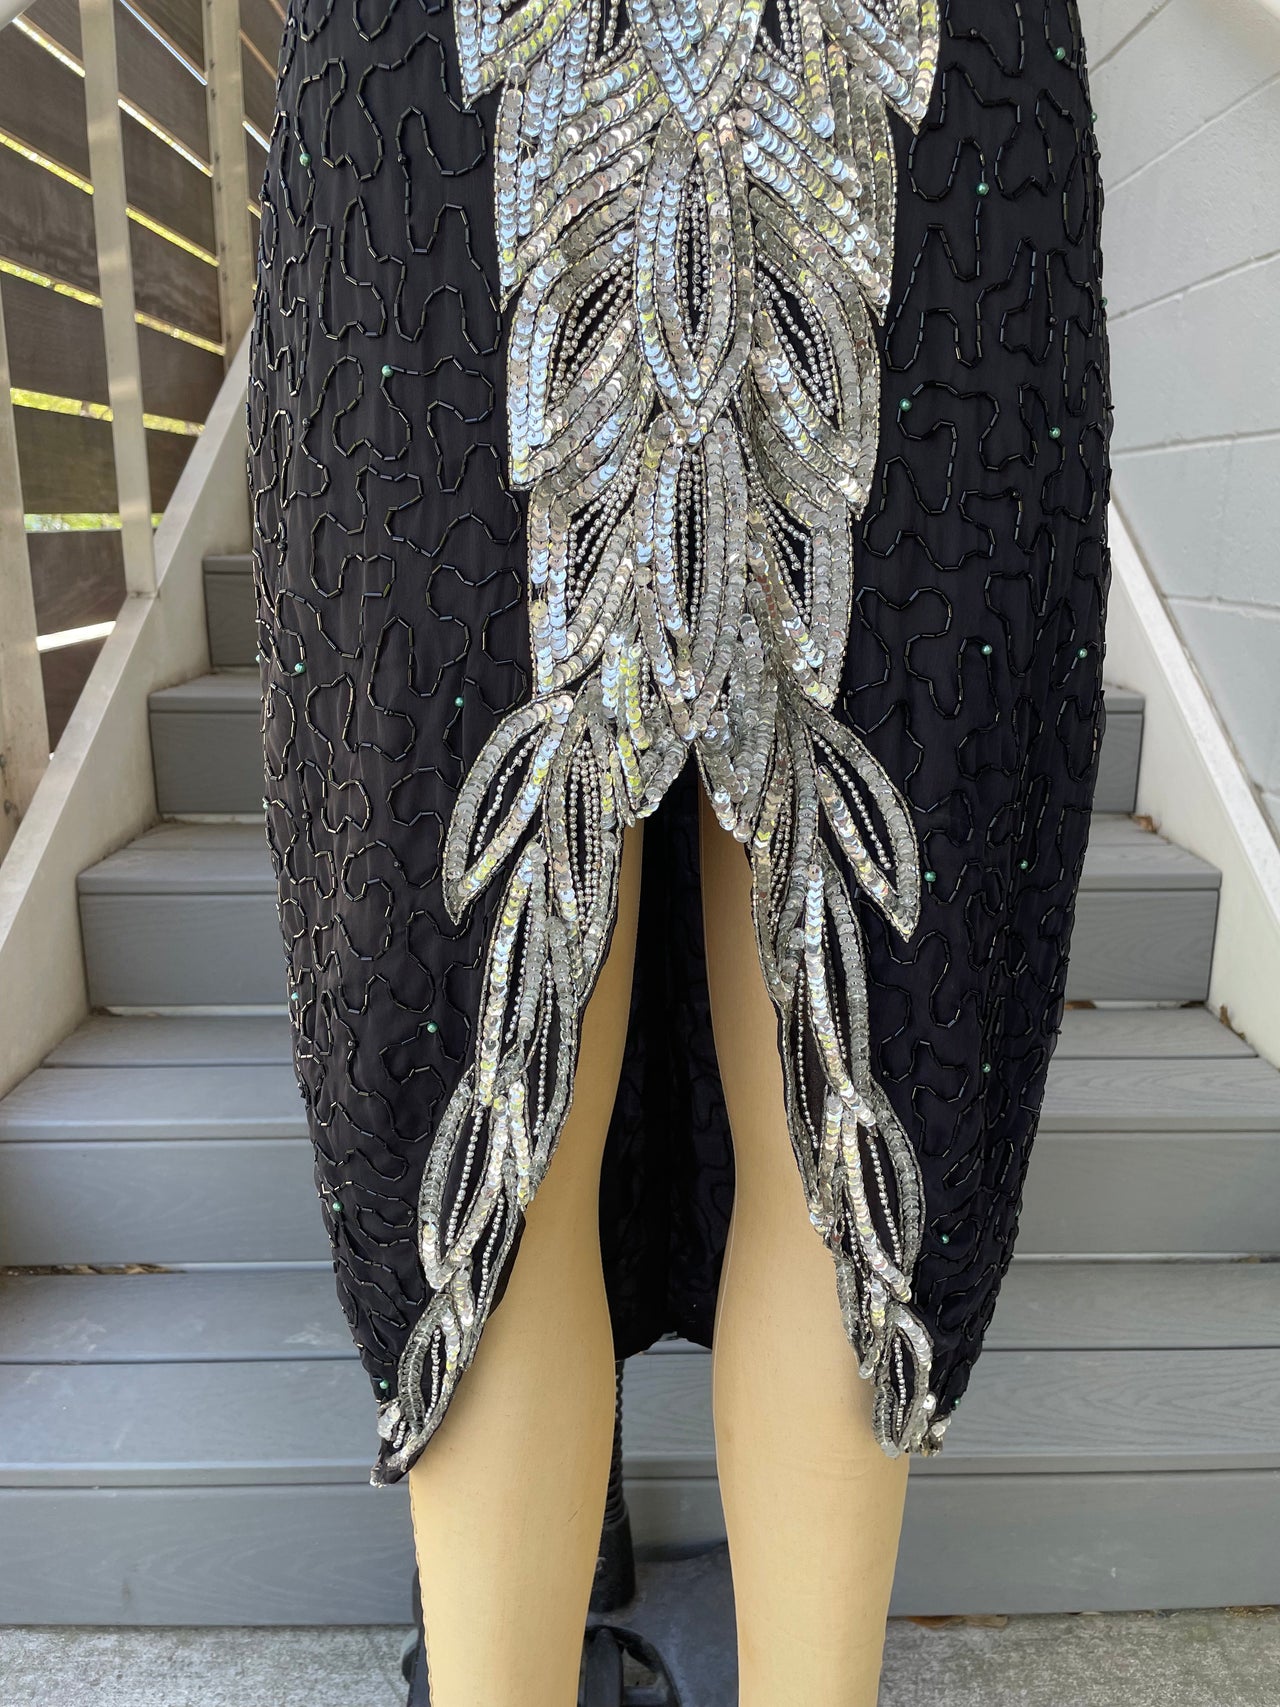 1980's Black and Silver Sequin "Feathered" Dress Dress Bloomers and Frocks 